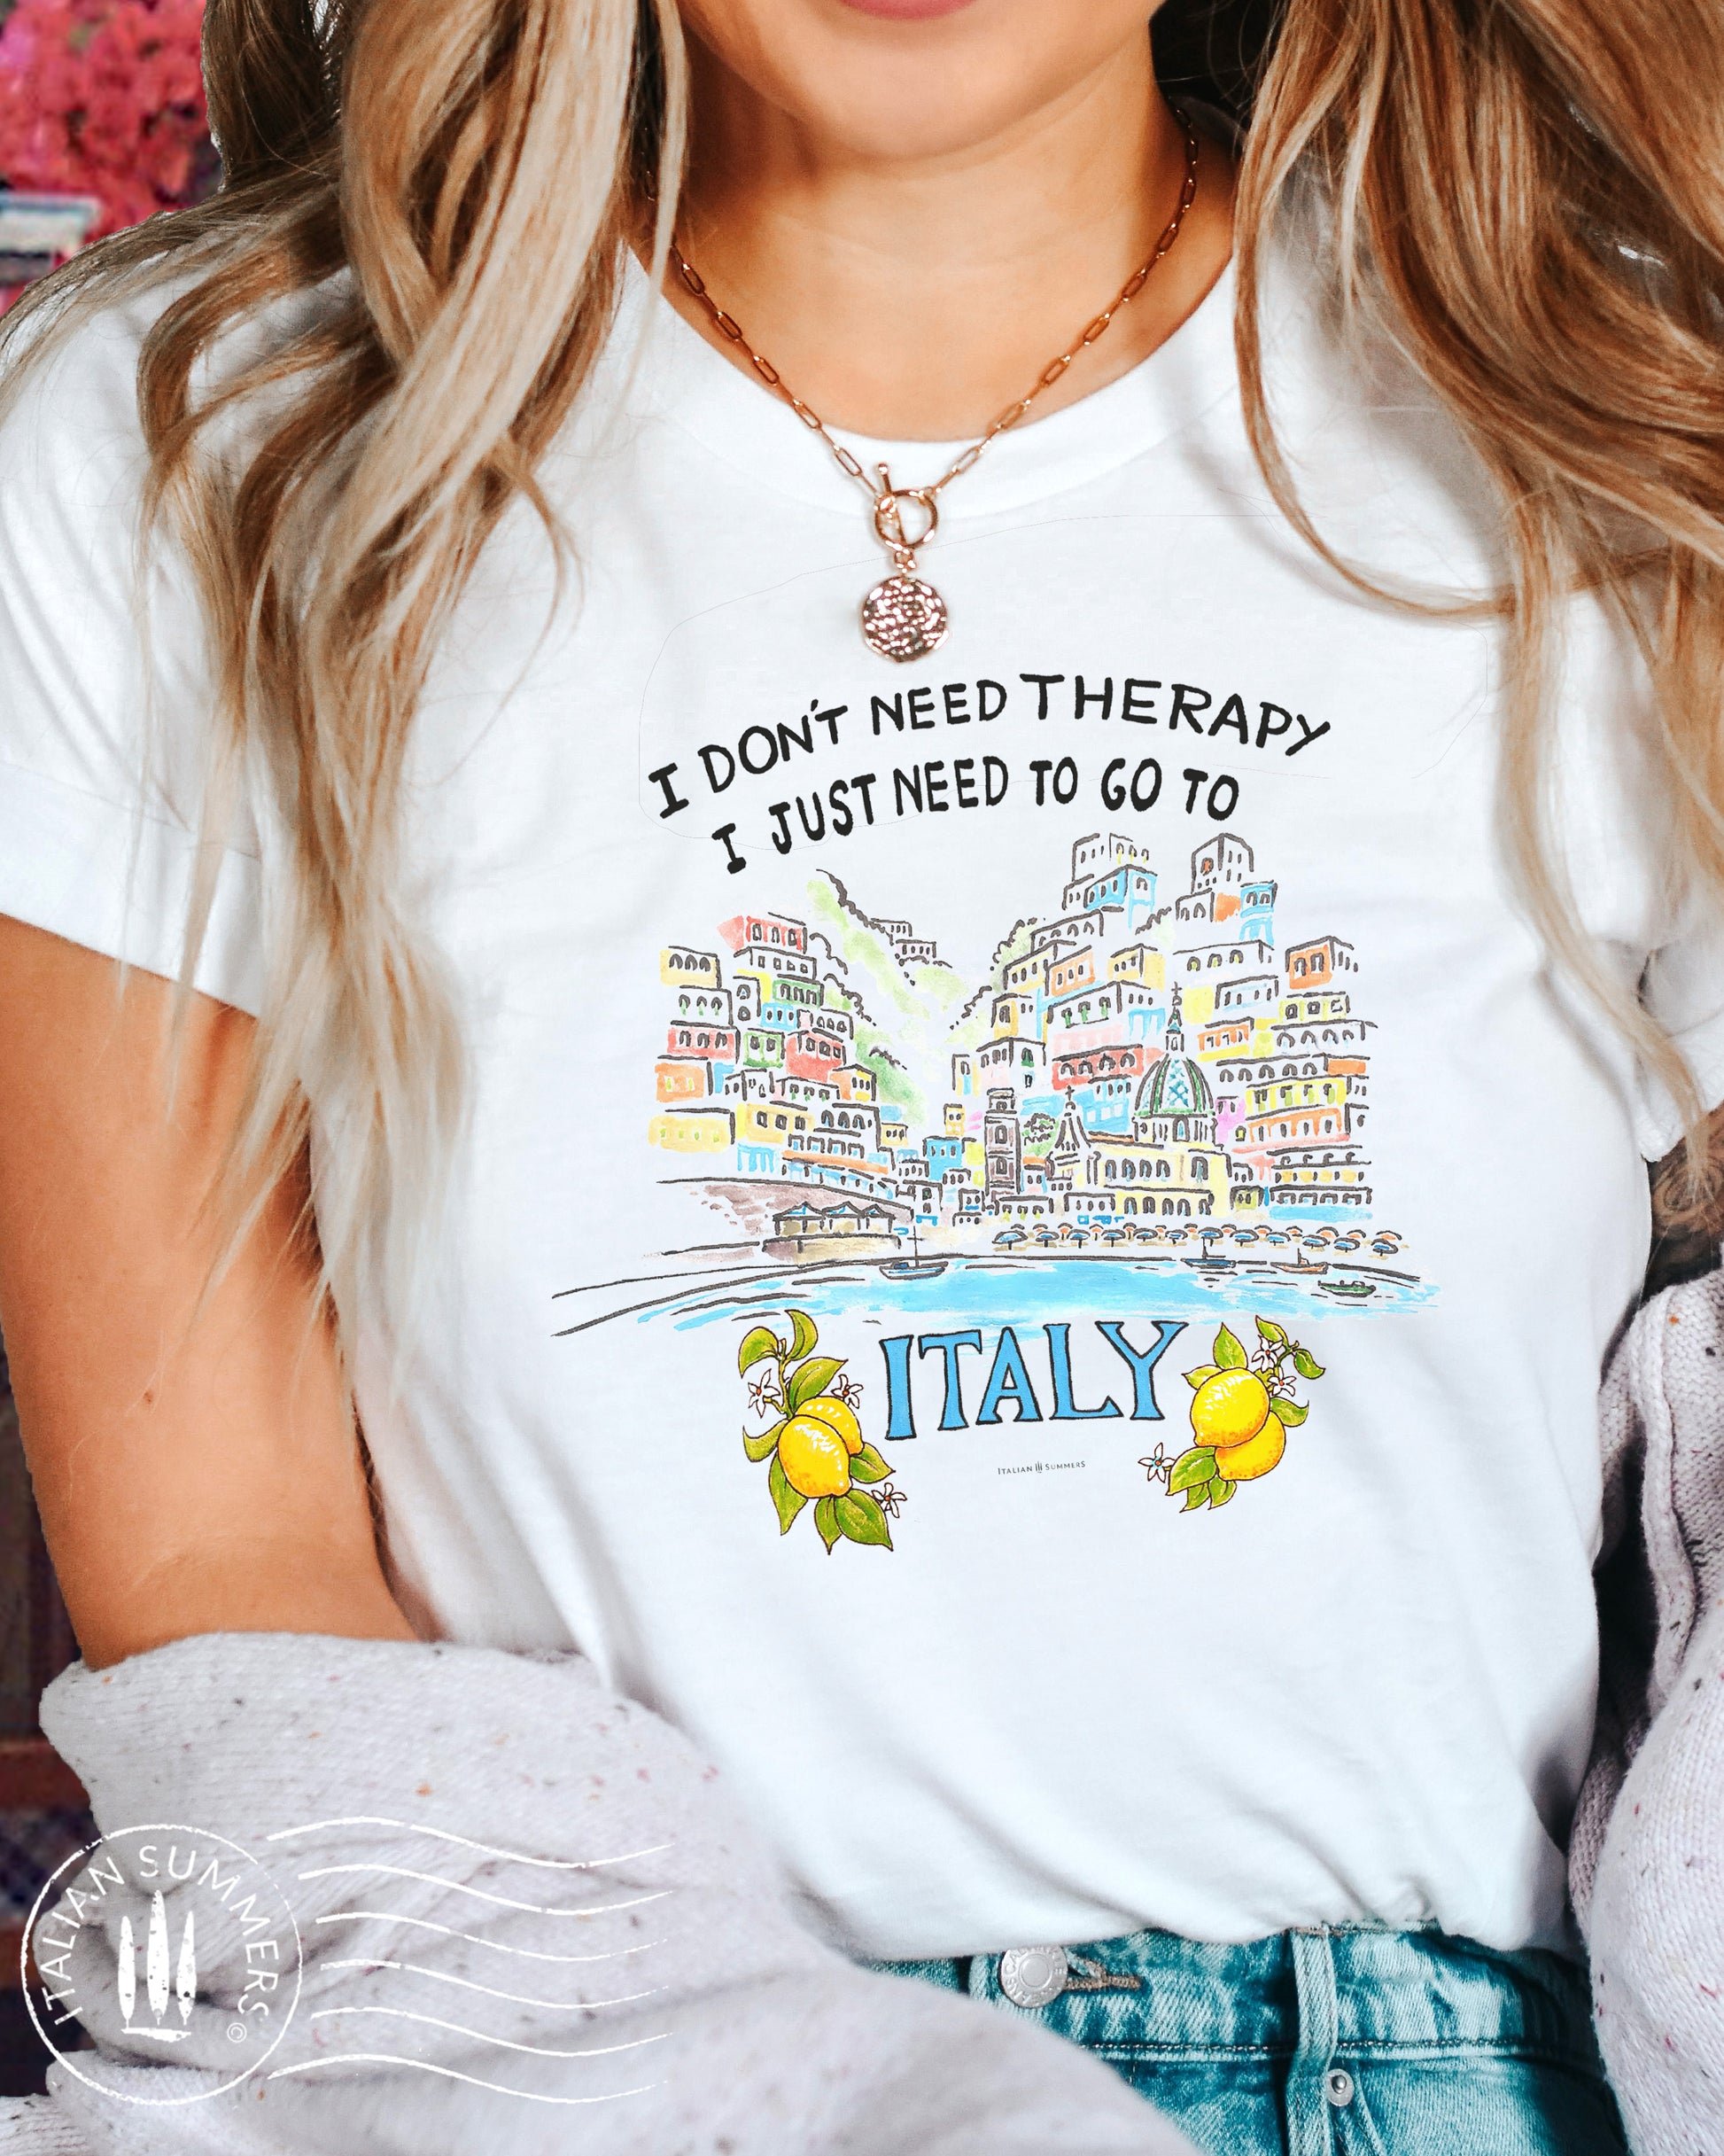 Italy and Amalfi Coast Inspired T Shirt with the hand-designed quote: I Don't need therapy I just need to go to Italy. A hand-drawing of the village of Positano with its colorful pastel  houses and terraces decorates this happy tee! Made by Italian Summers